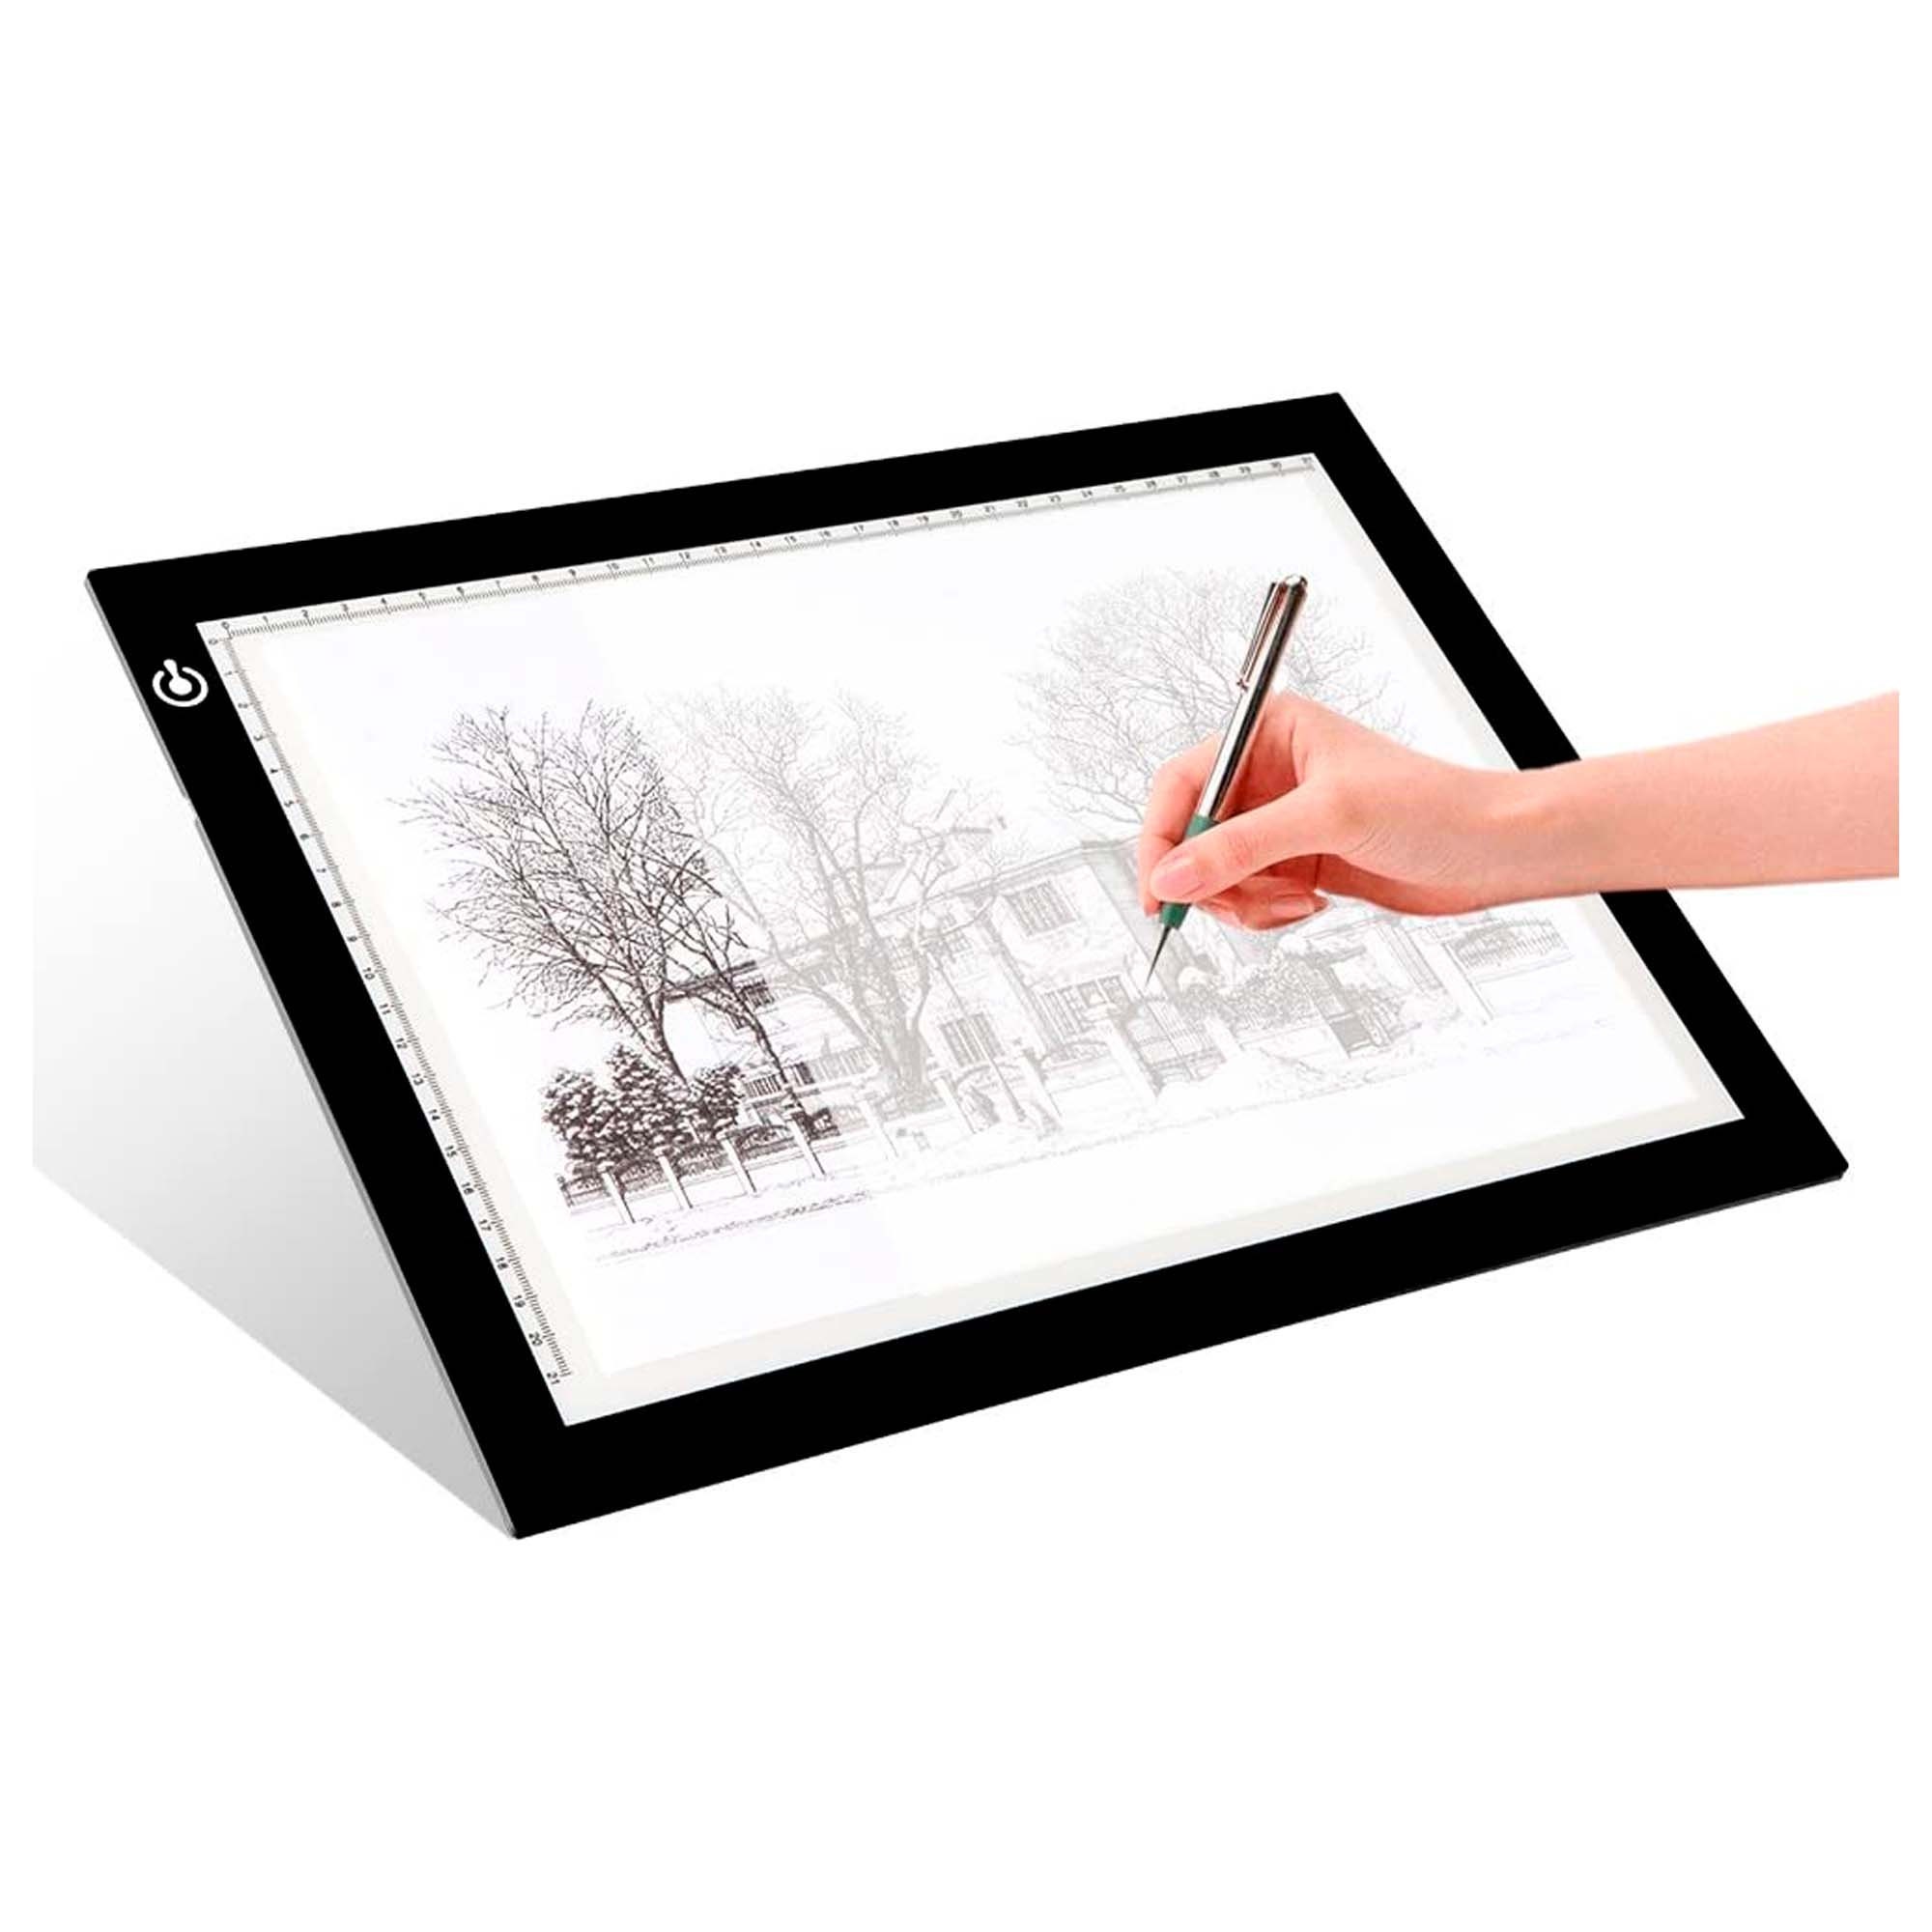 EXCEART A4 Led Drawing Board Diamond Art Light Led Copy Board Dimond  Lightbox Copy Drawing Board Light Tracing Table Led Light Tablet Pad  Painting